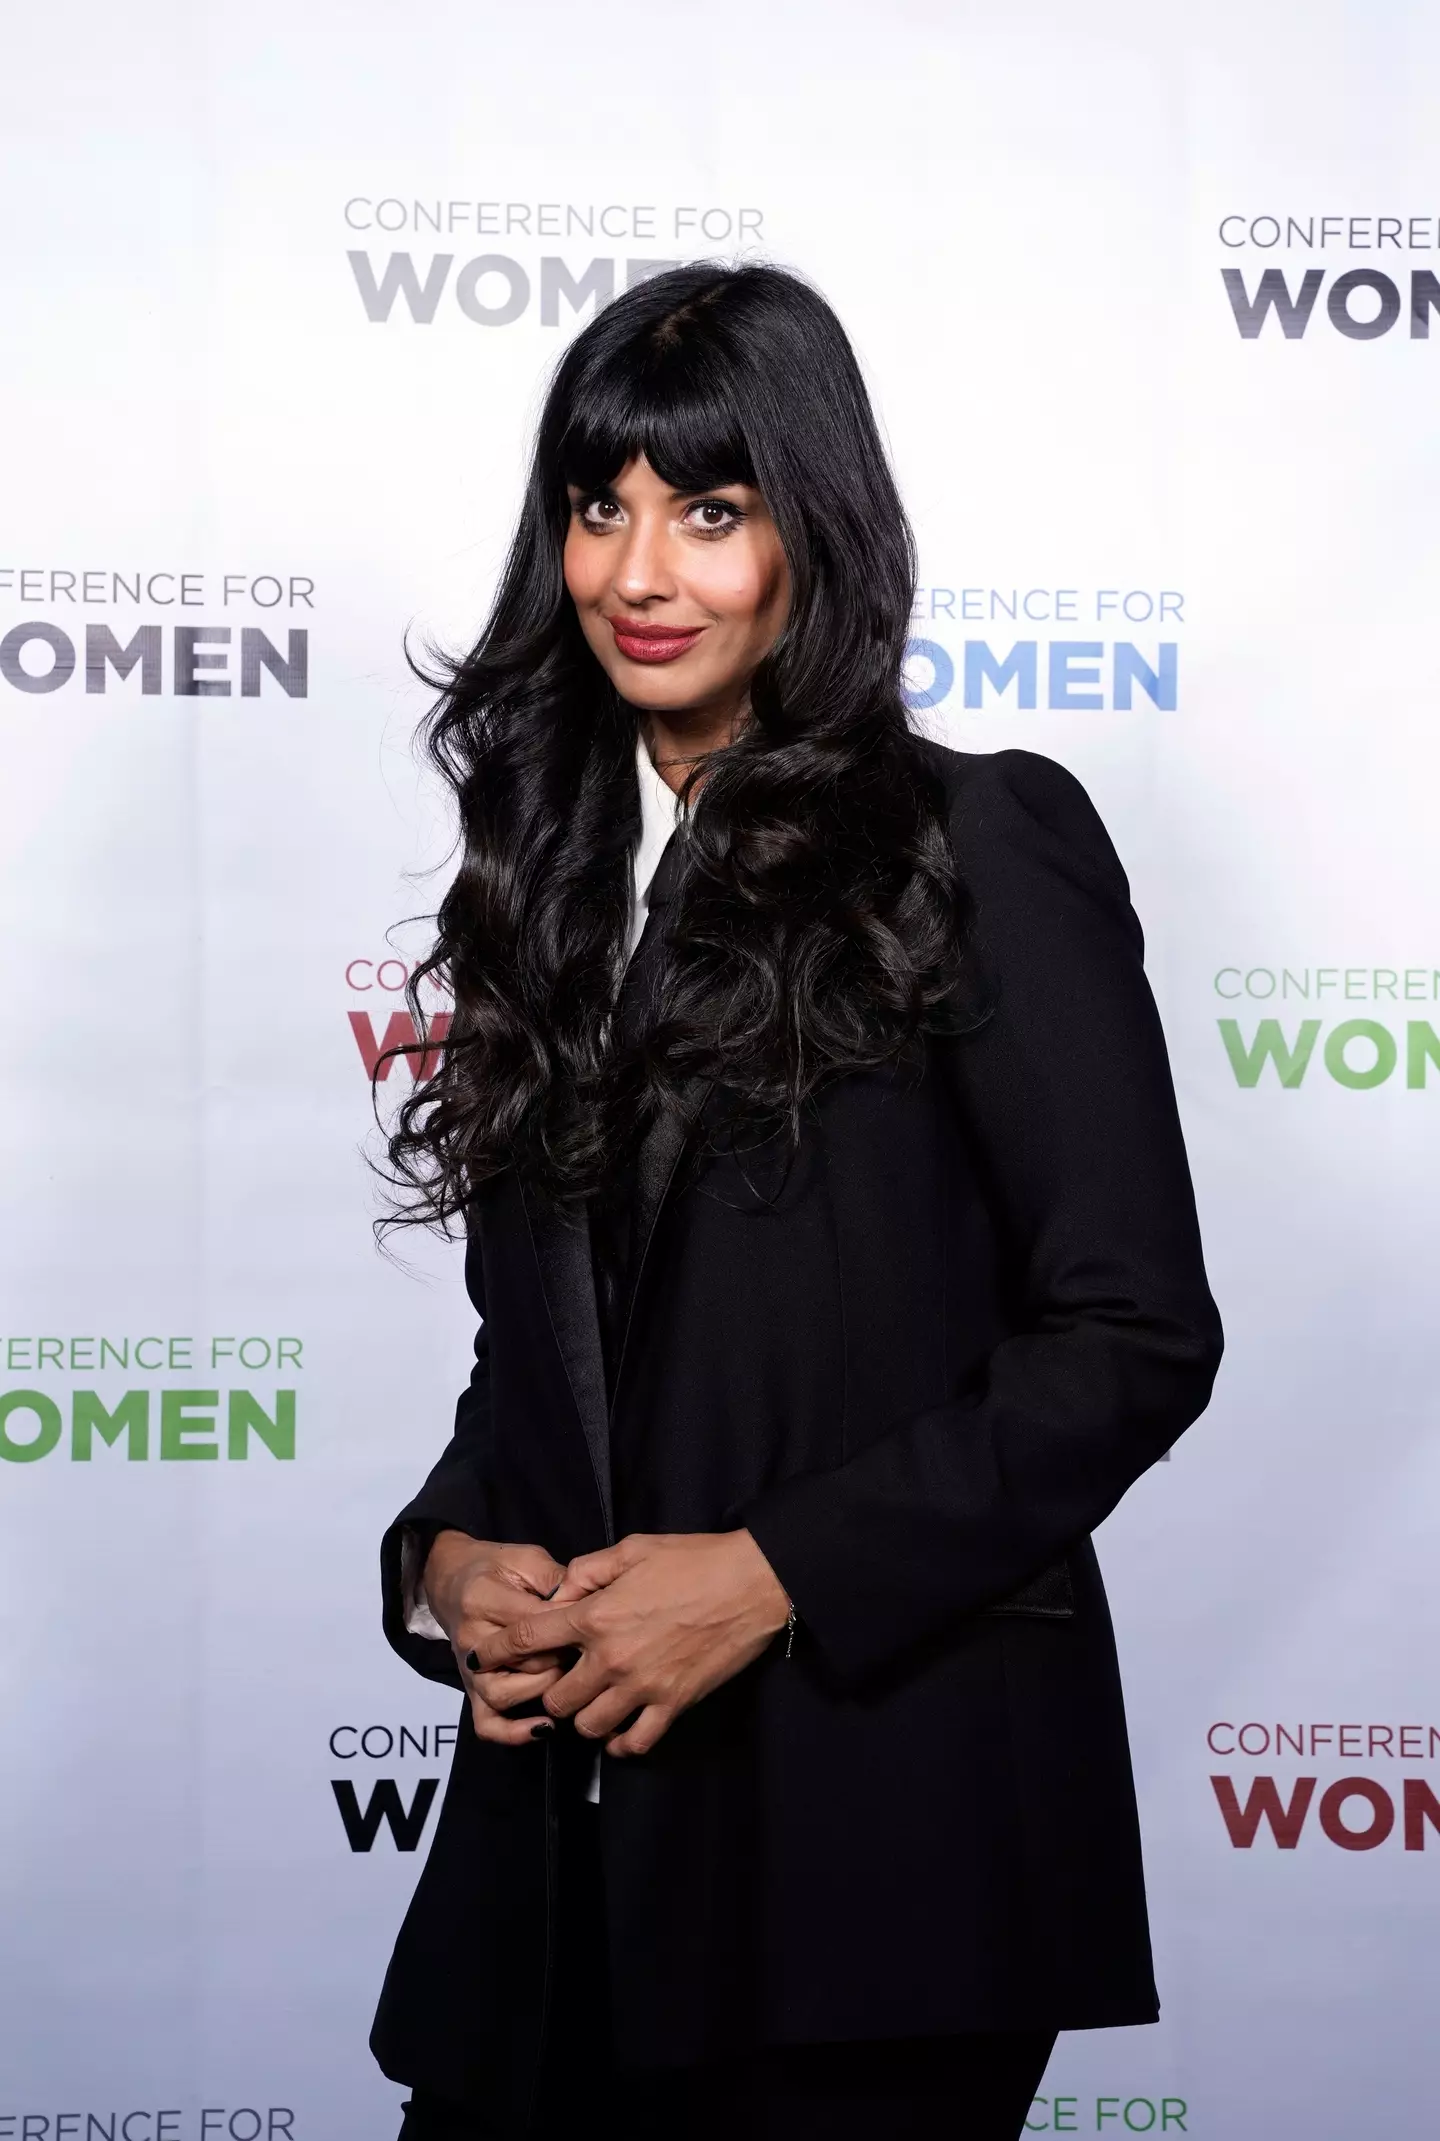 Jameela Jamil has been criticized by some over her apparent support of Lizzo.